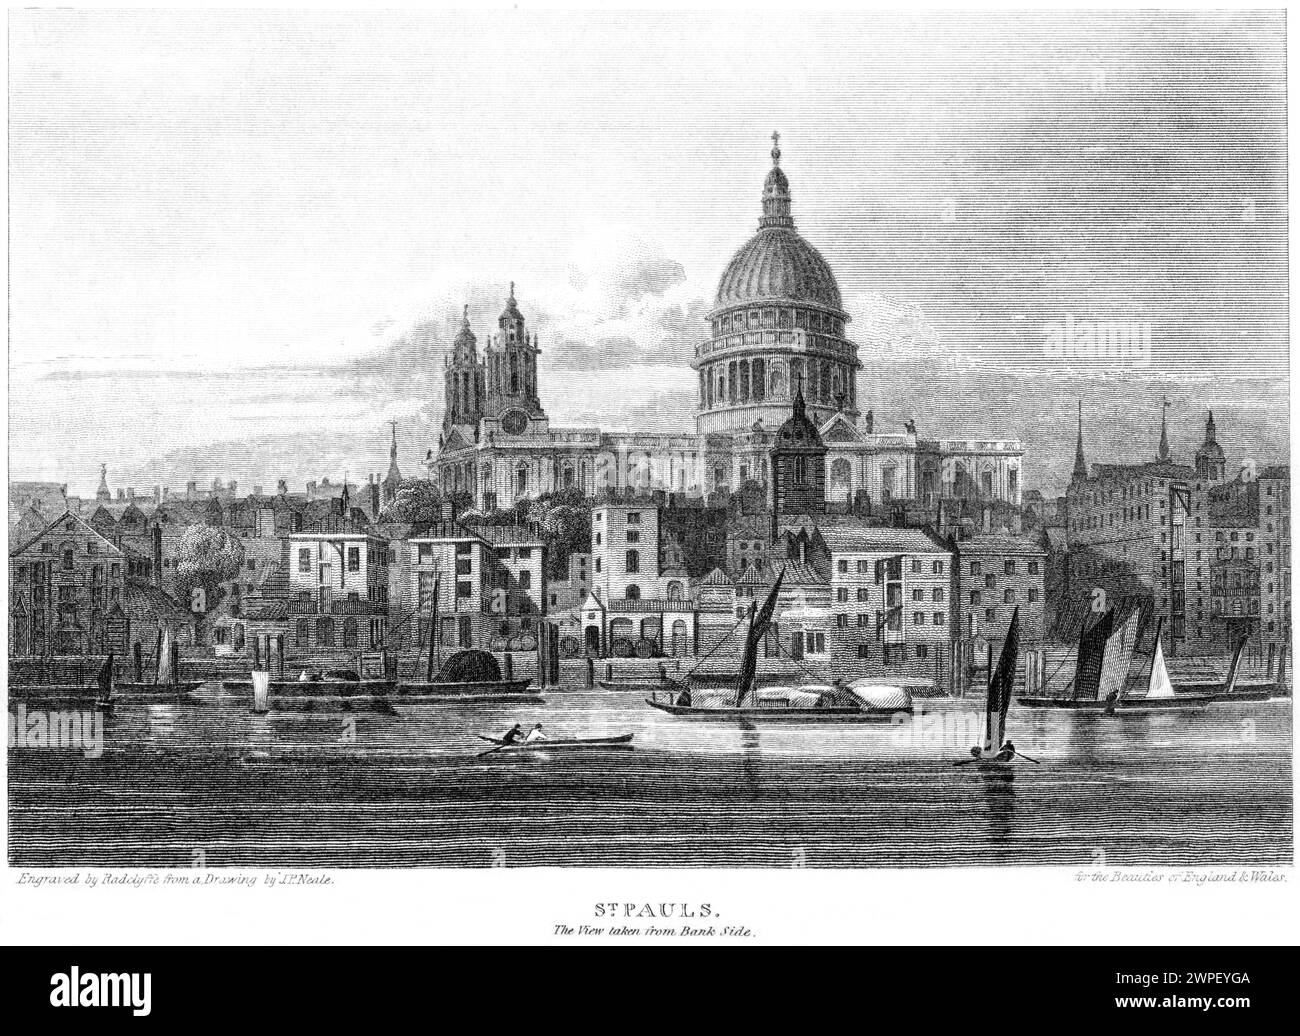 An engraving entitled St Pauls. The View taken from Bank Side, London UK scanned at high resolution from a book published around 1815. Stock Photo